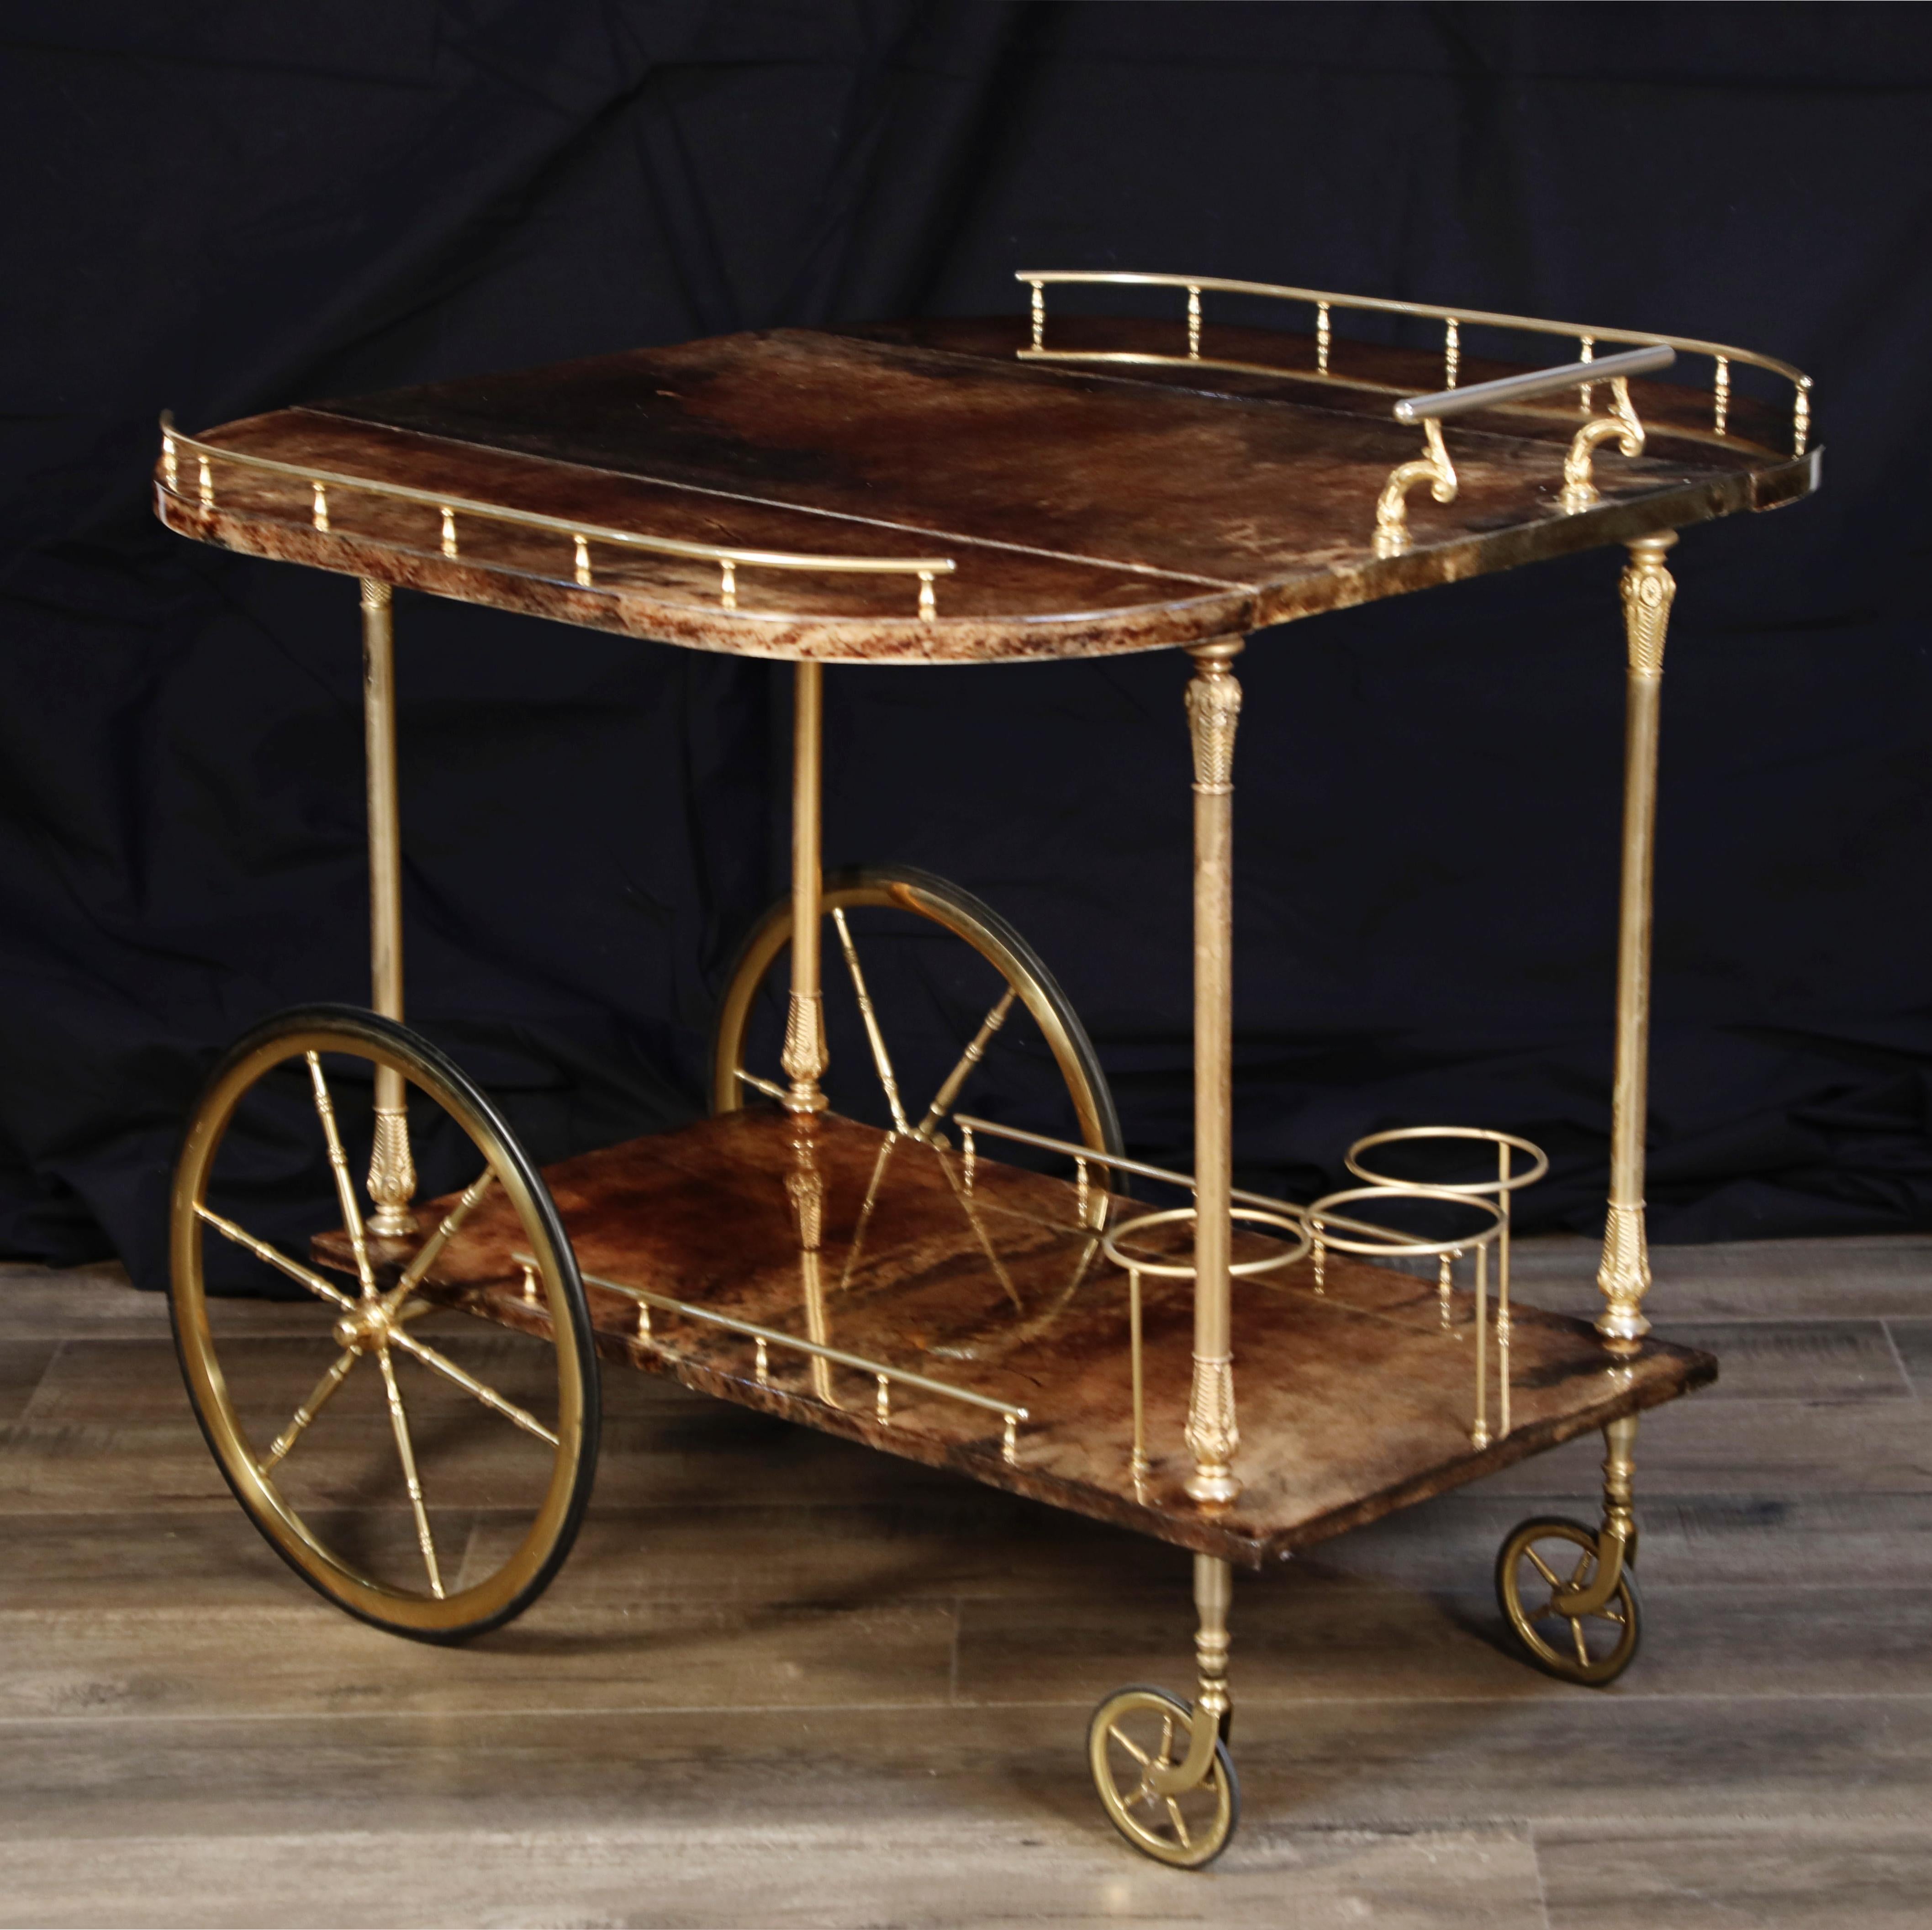 Mid-20th Century Aldo Tura Lacquered Goatskin and Brass Italian Double Drop-Leaf Bar Cart, Signed